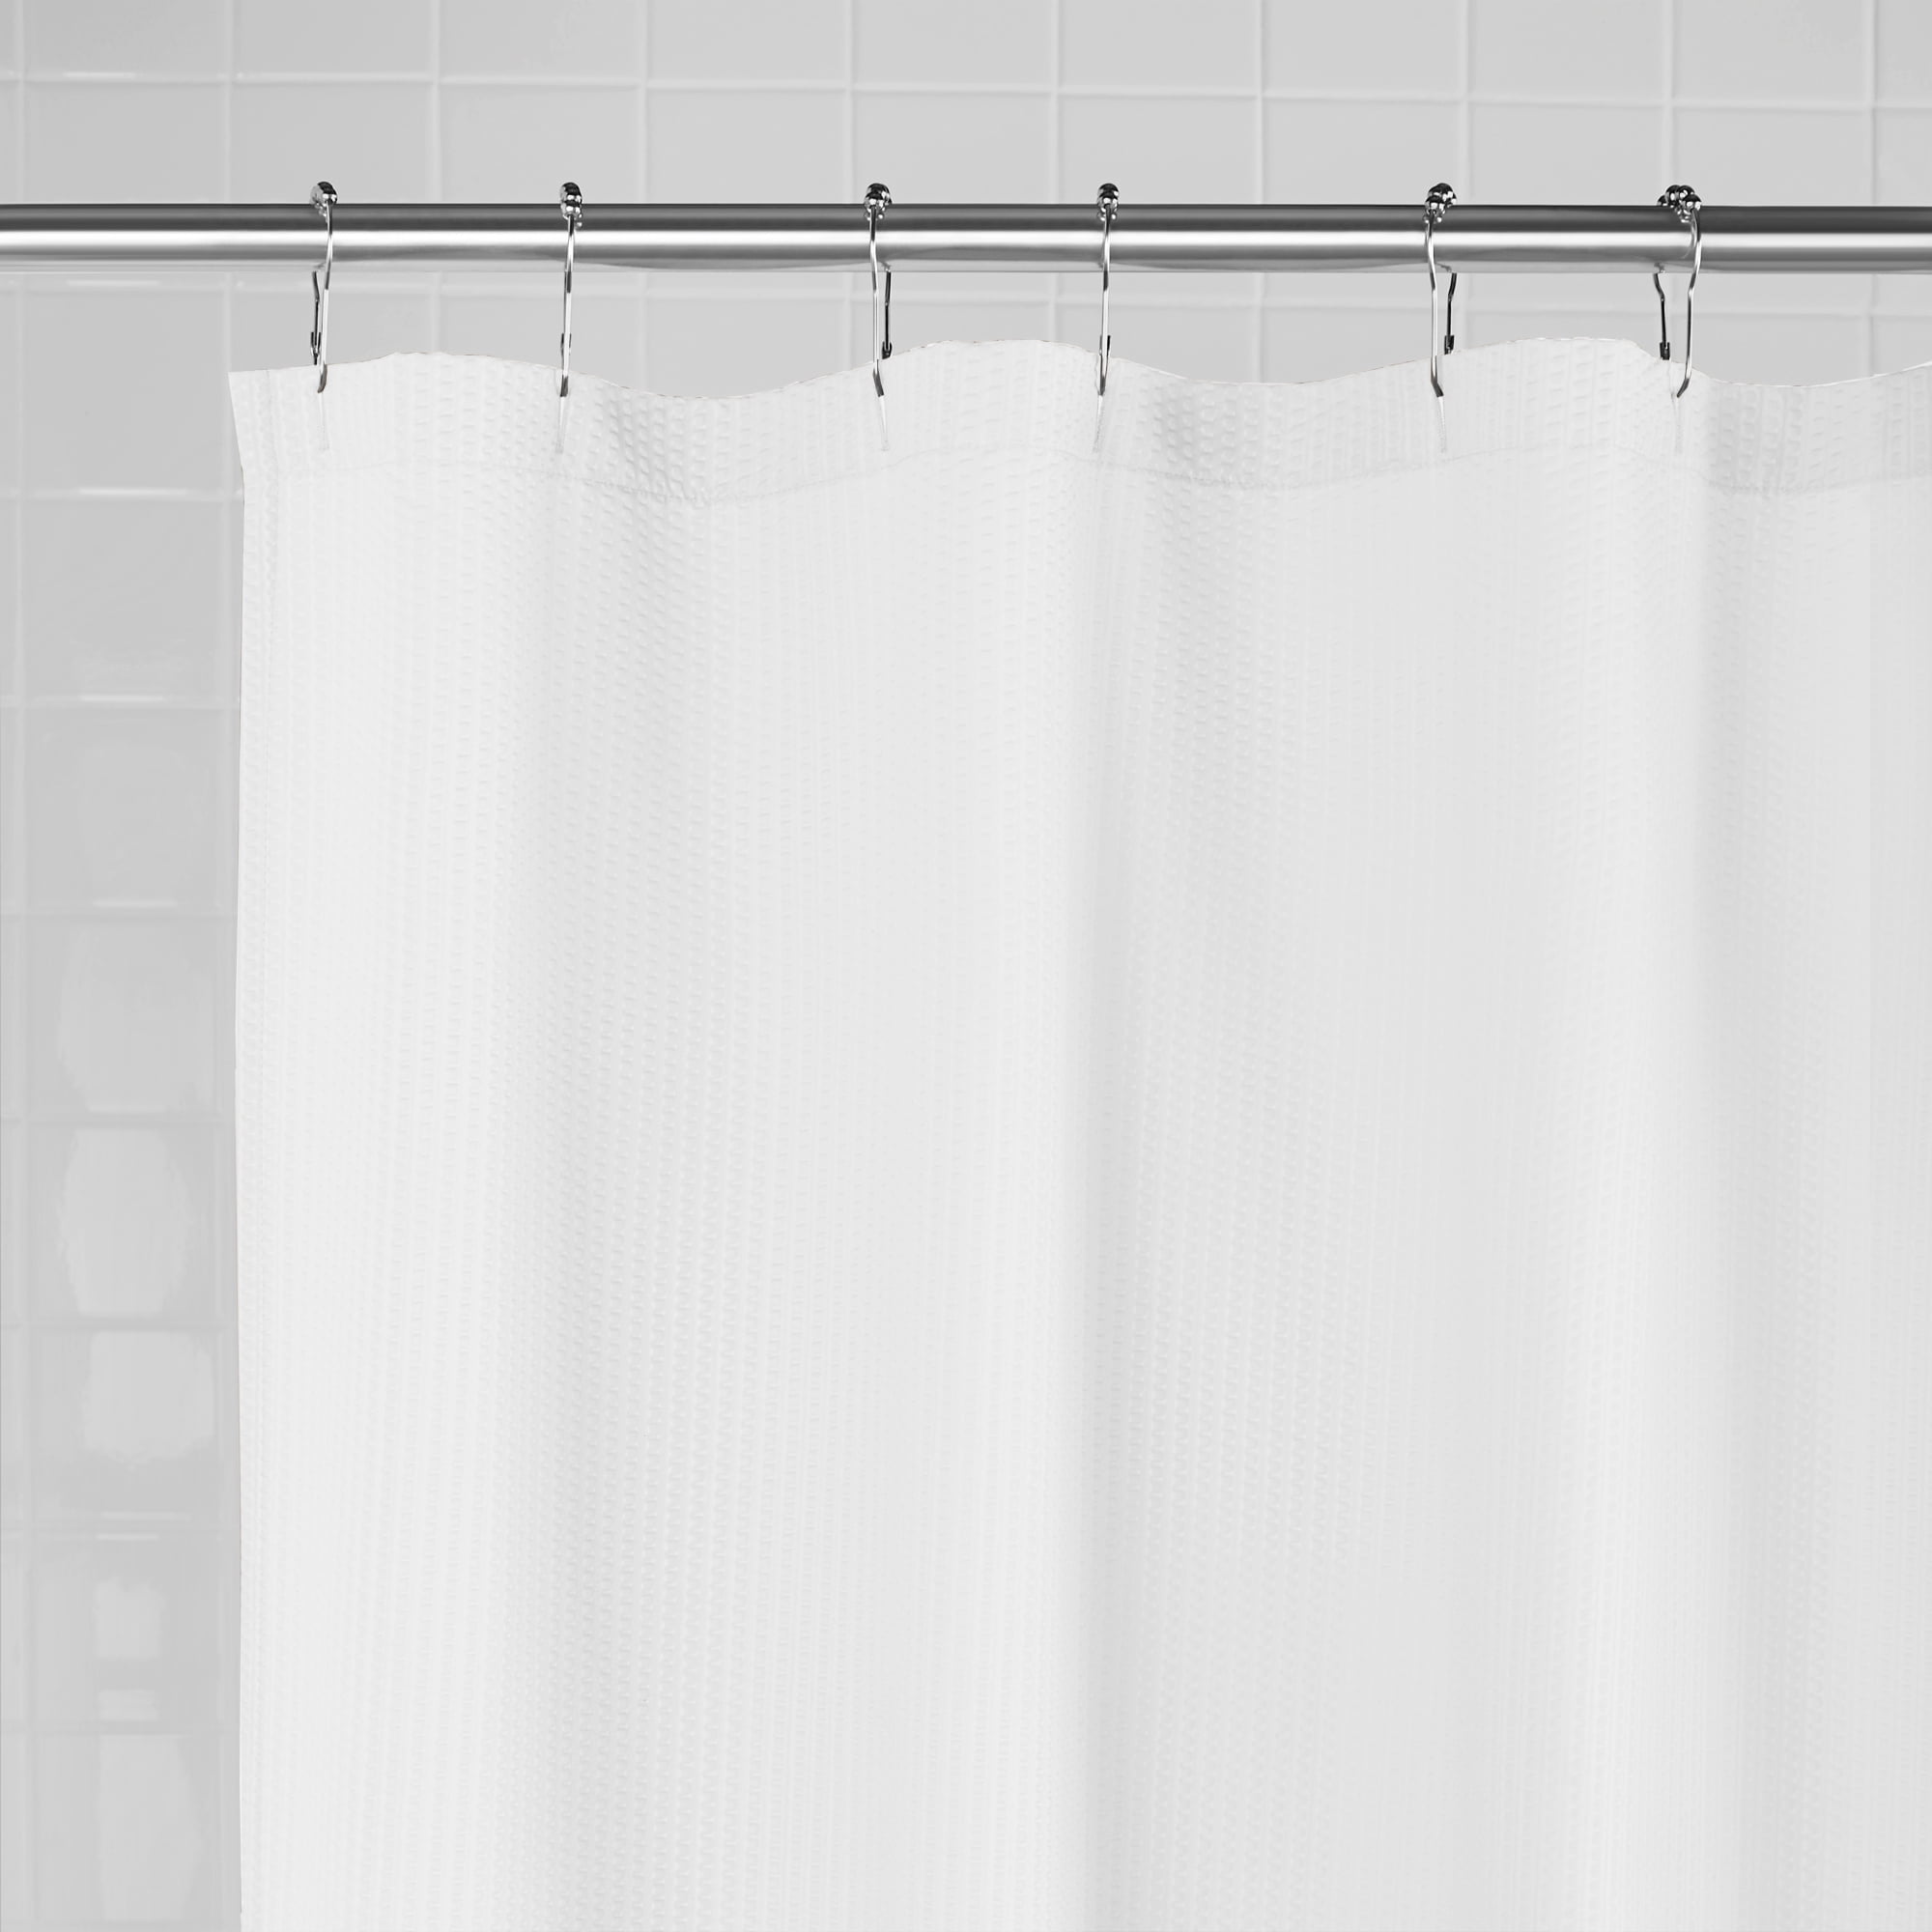 New Mainstays Water Repellent Fabric Shower Curtain or Liner 72" x 70" in Gray 